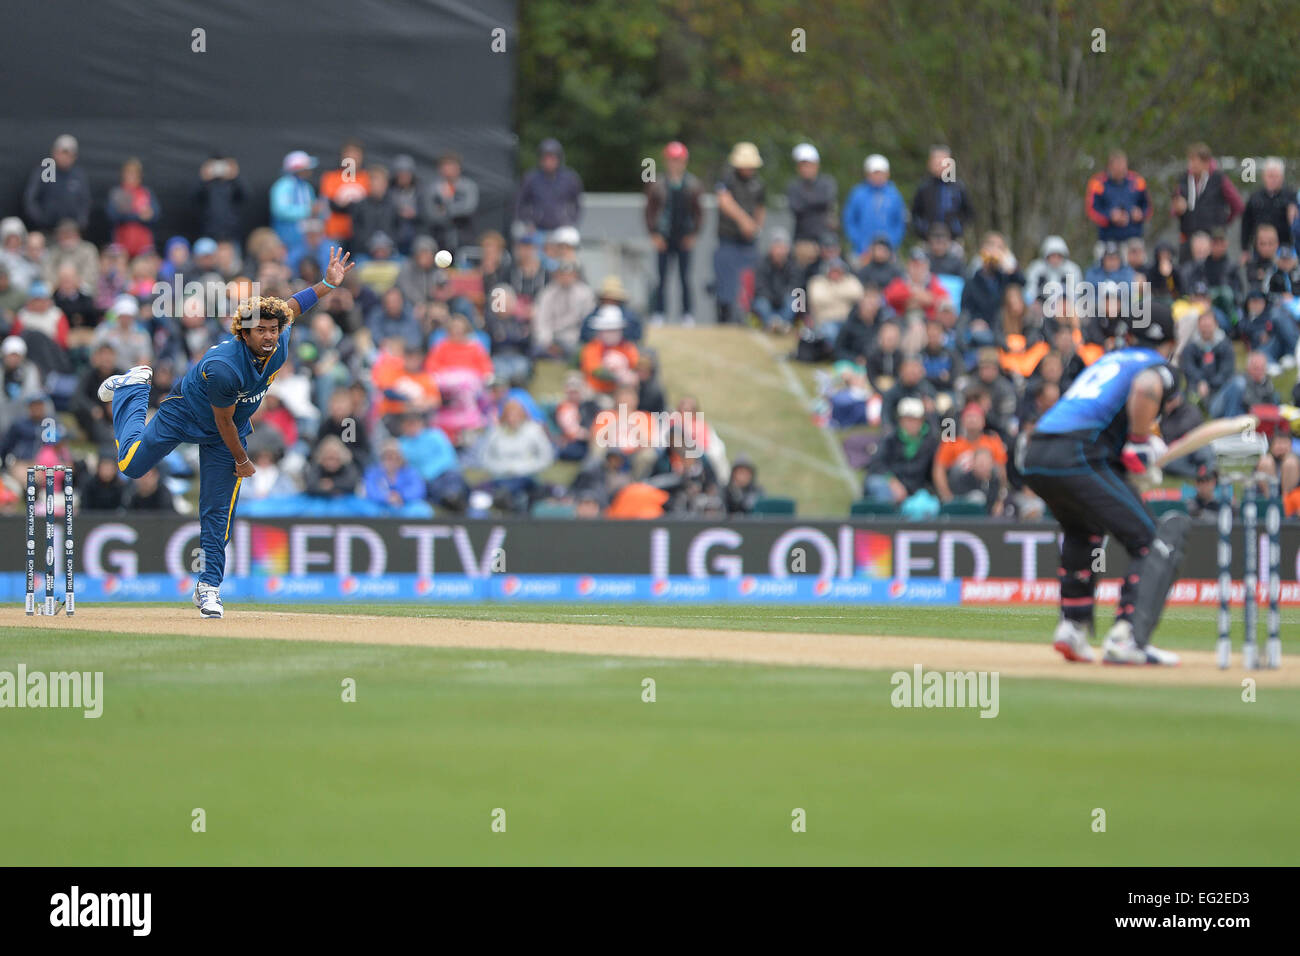 Christchurch, New Zealand. 14th Feb, 2015. Christchurch, New Zealand - February 14, 2015 - Lasith Malinga of Sri Lanka bowling and Brendon McCullum of New Zealand (L-R) during the ICC Cricket World Cup Match between Sri Lanka and New Zealand at Hagley Oval on February 14, 2015 in Christchurch, New Zealand. © dpa/Alamy Live News Stock Photo